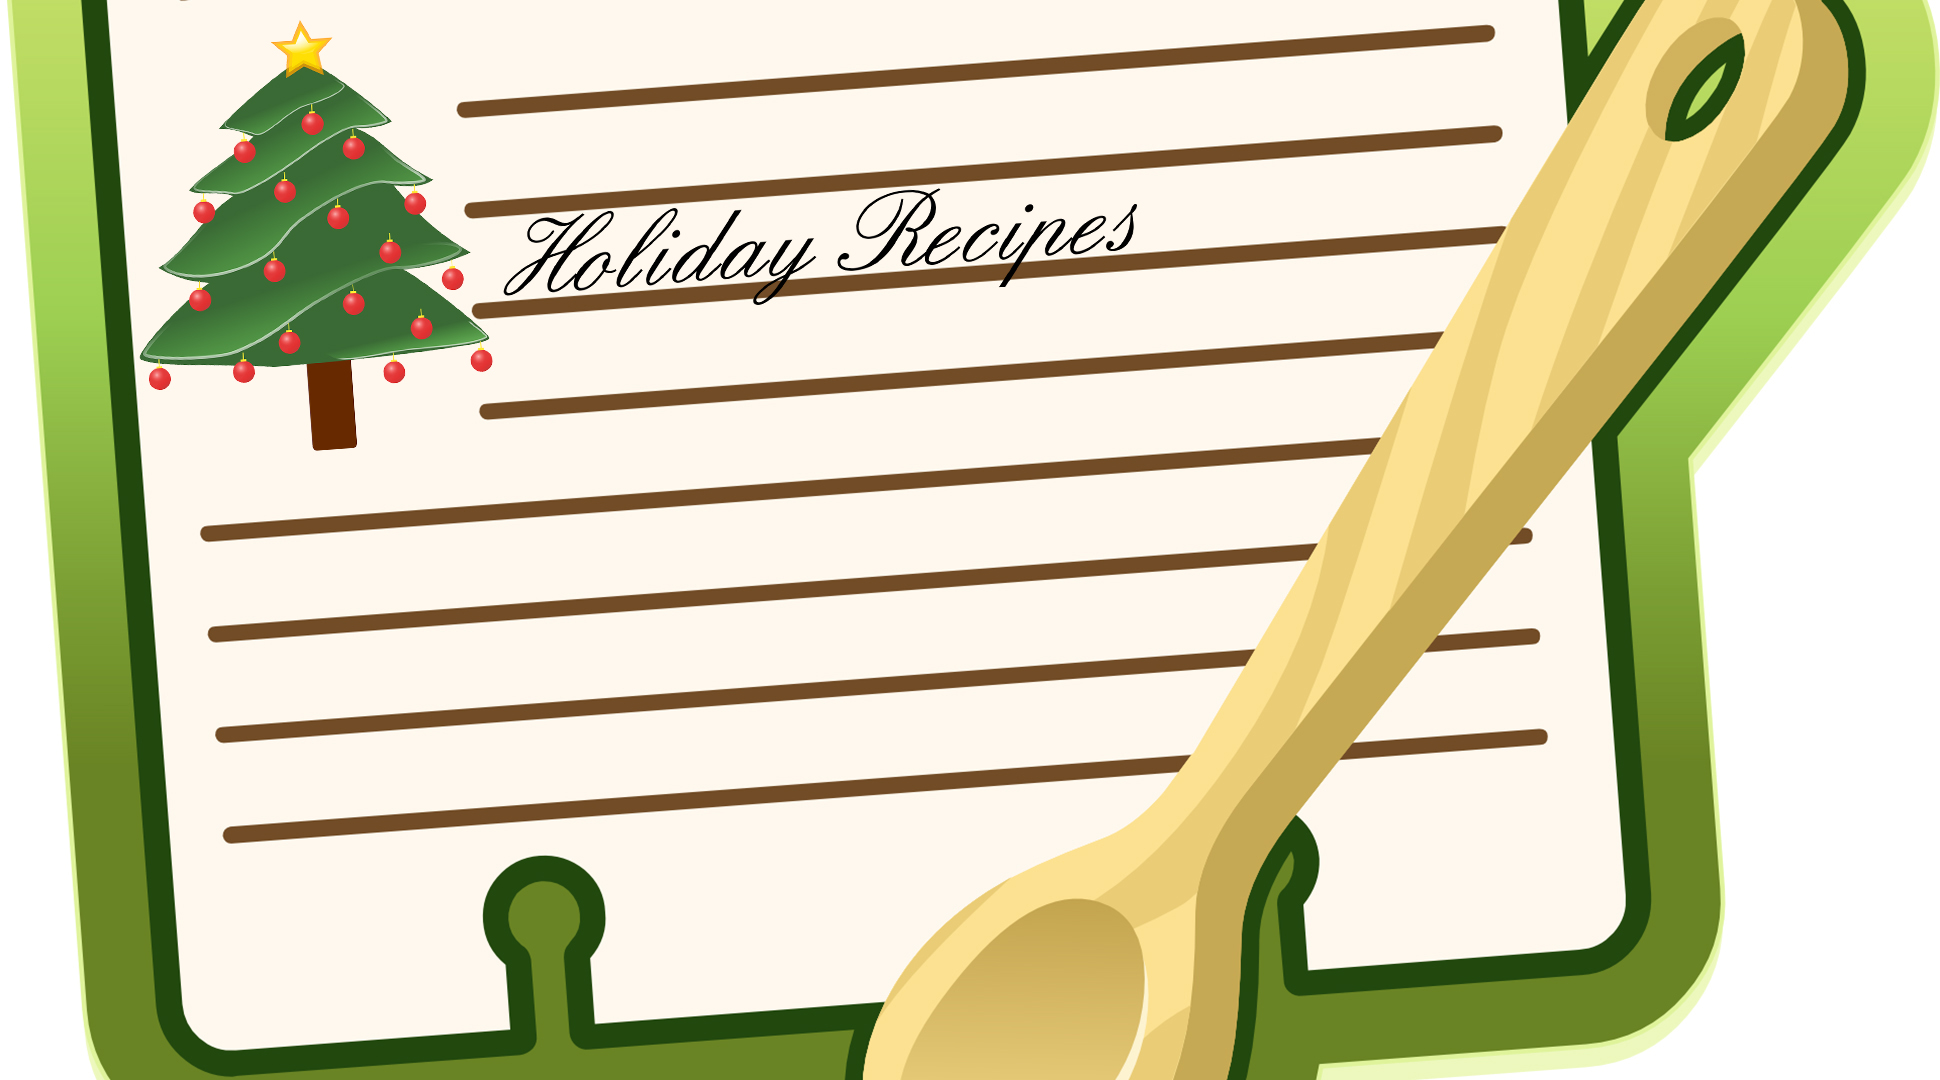 Looking for new recipes for the holidays?